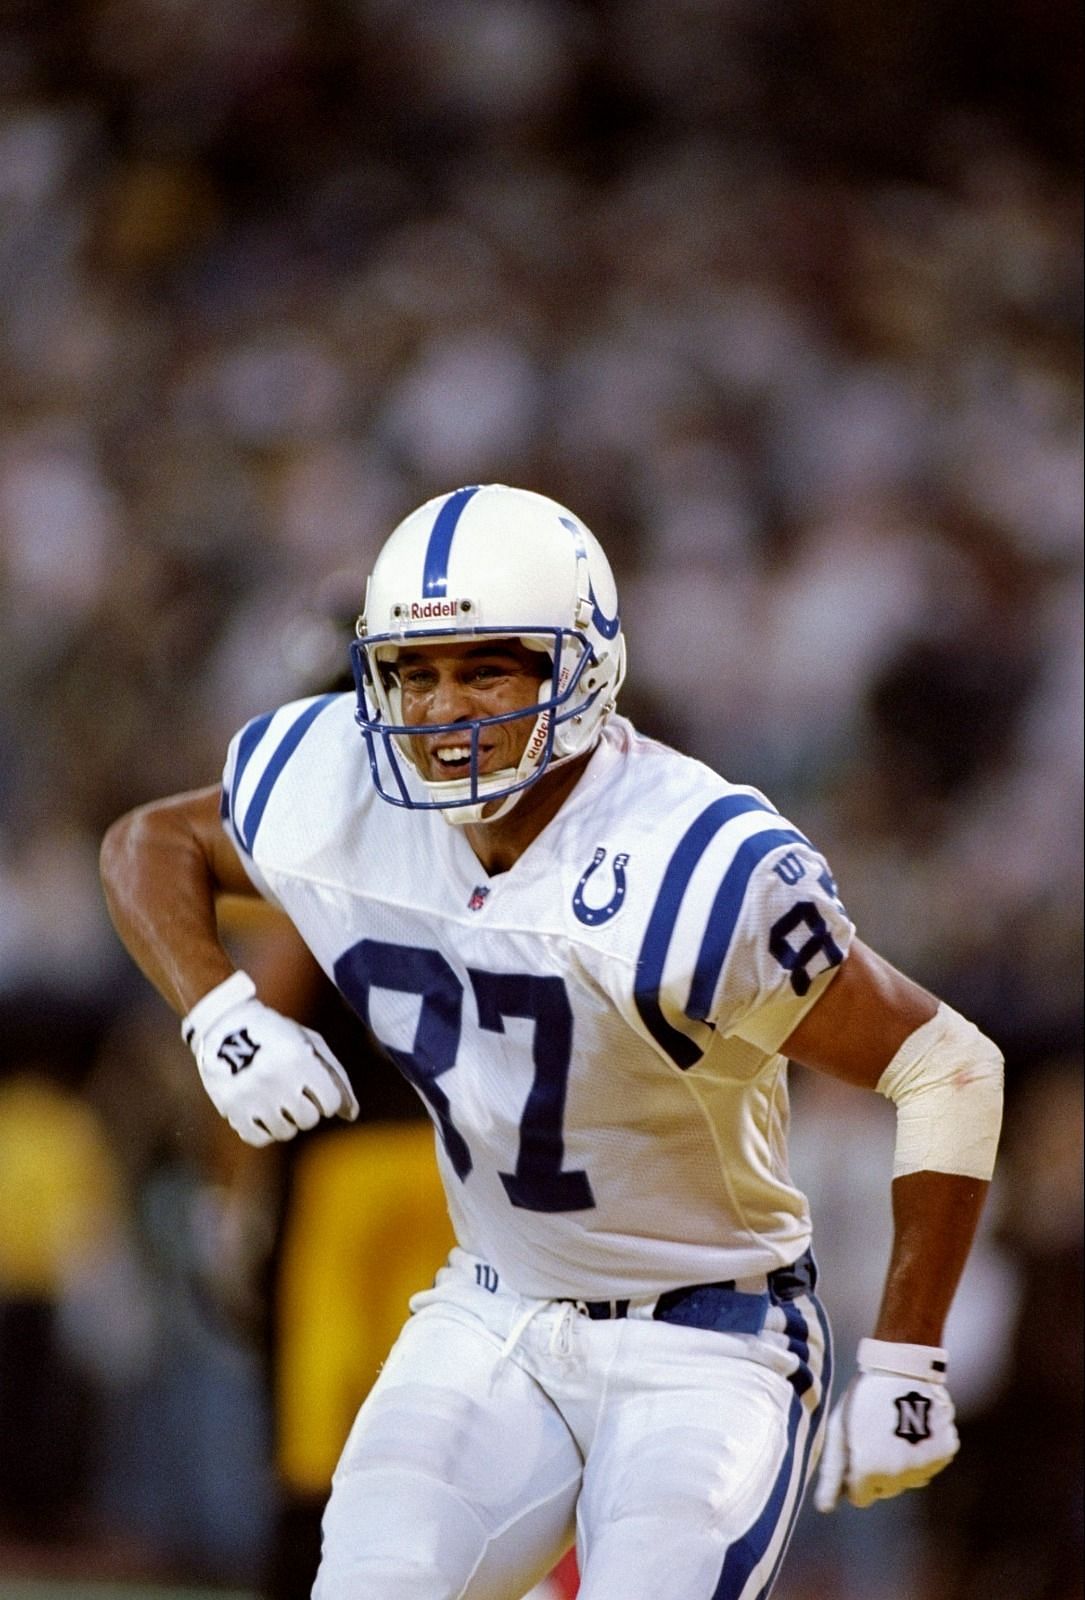 Sean Dawkins celebrating as a member of Indianapolis Colts